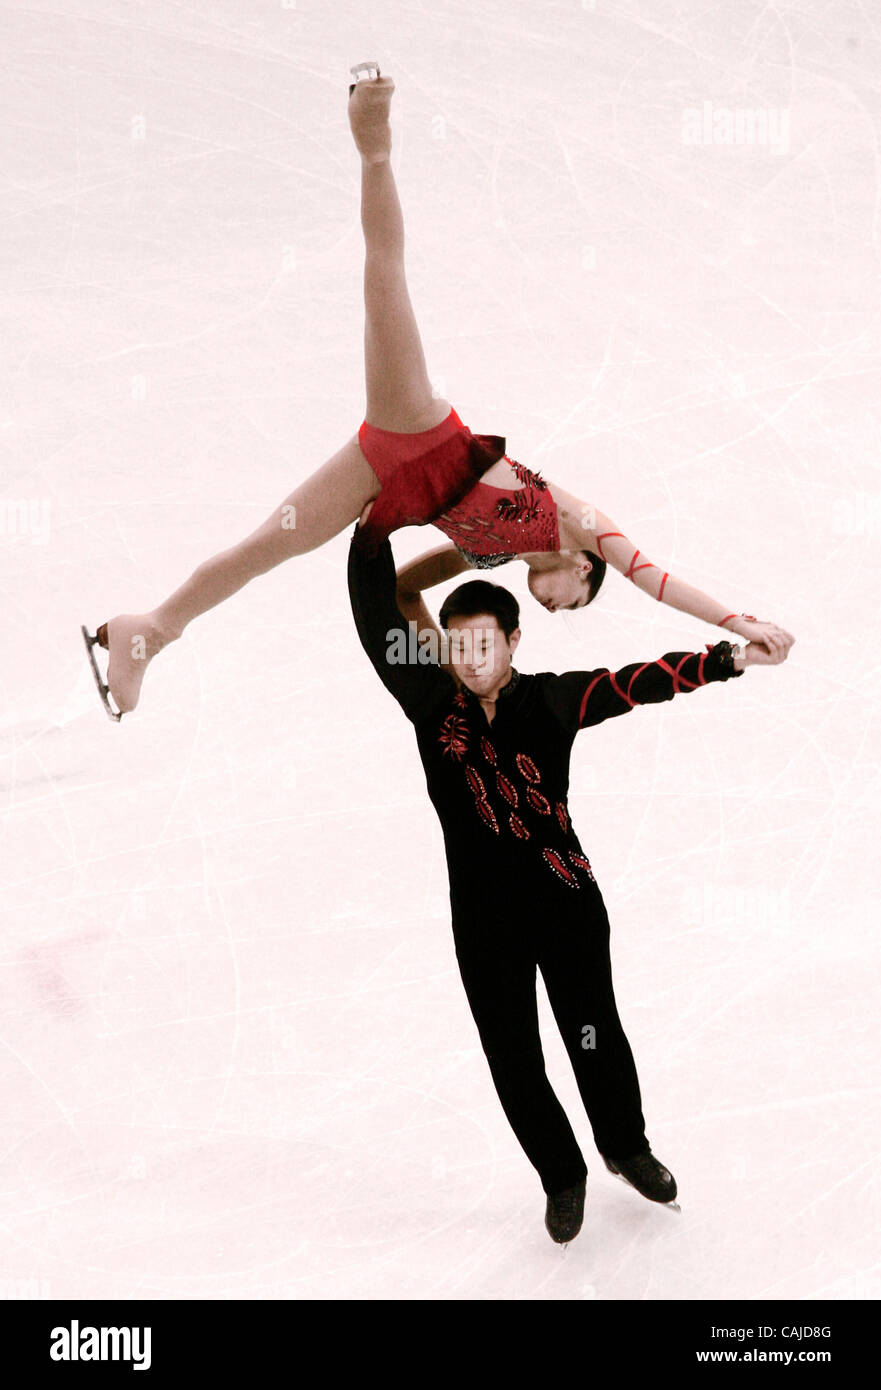 guardarropa deseable cerca St. Paul, 01/21/2008] Steve Hsu does a Star Lift with partner Christina  Guterres during the 2008 U.S. Figure Skating Champion Novice Pairs Free  Skate. They are from the All Stock Photo - Alamy